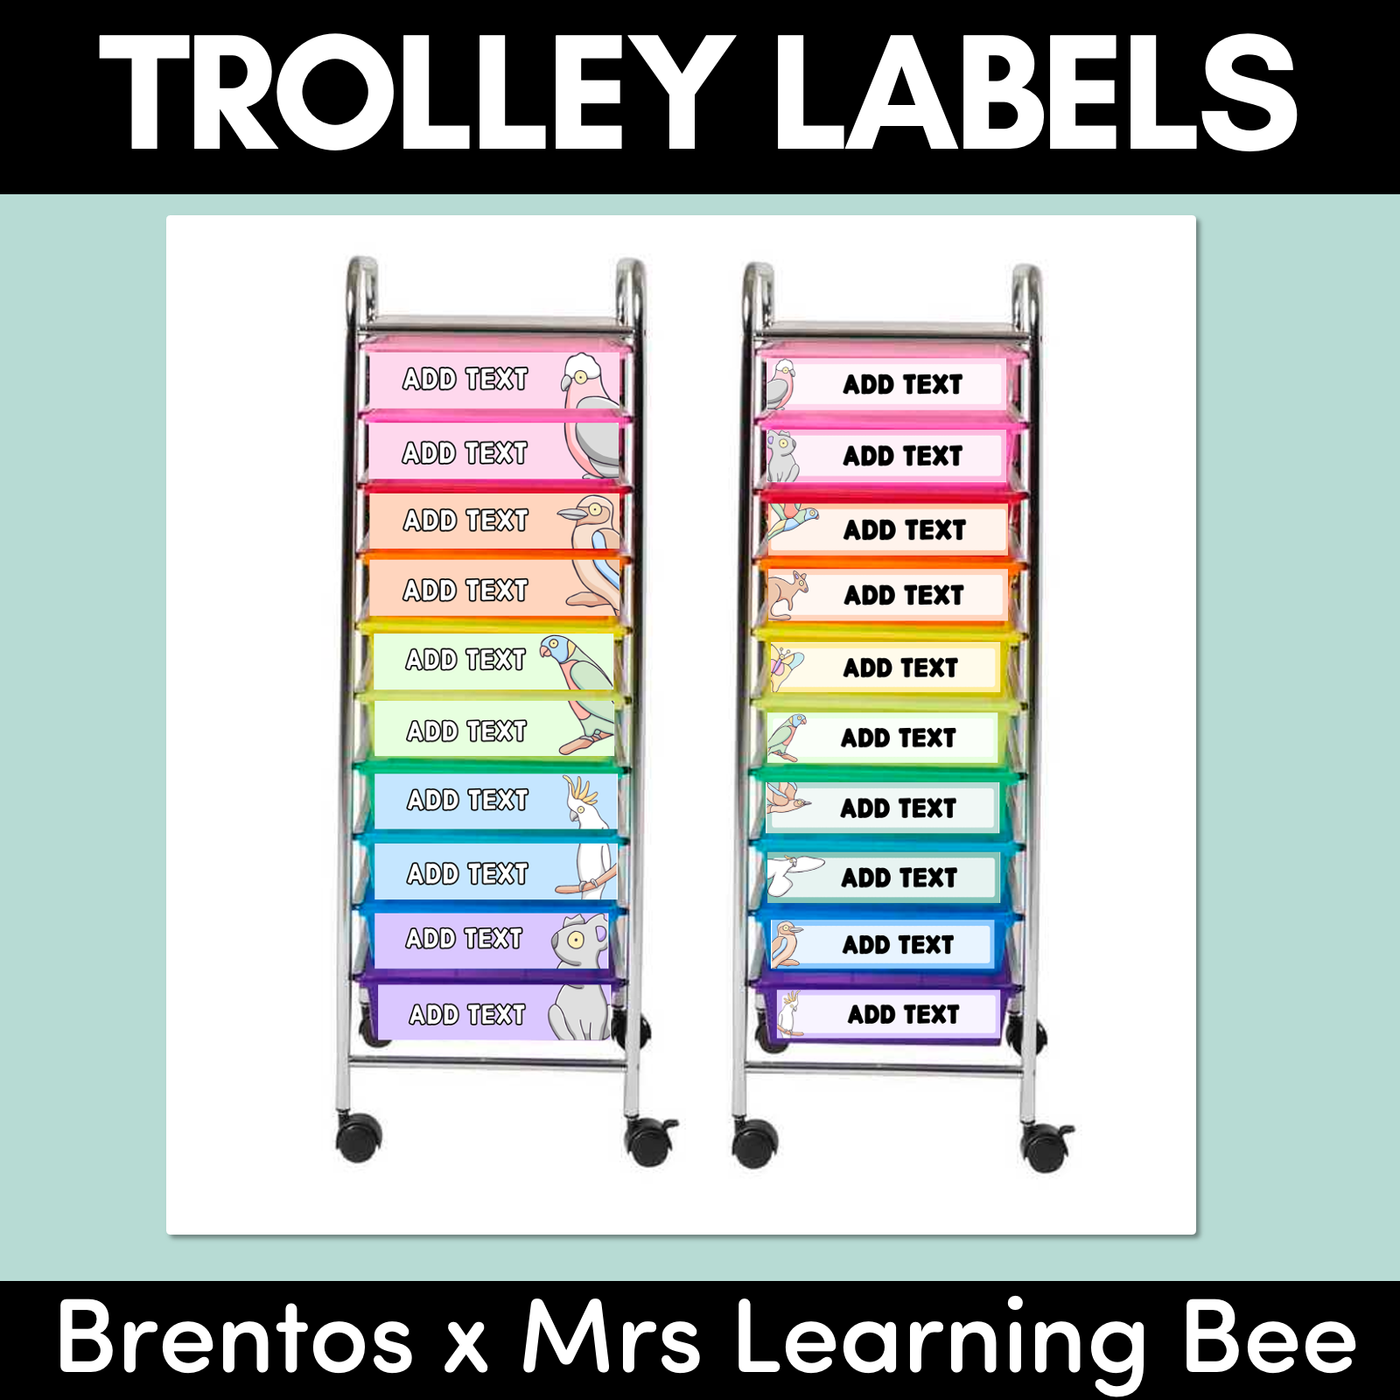 Trolley Labels - The Brentos Collection